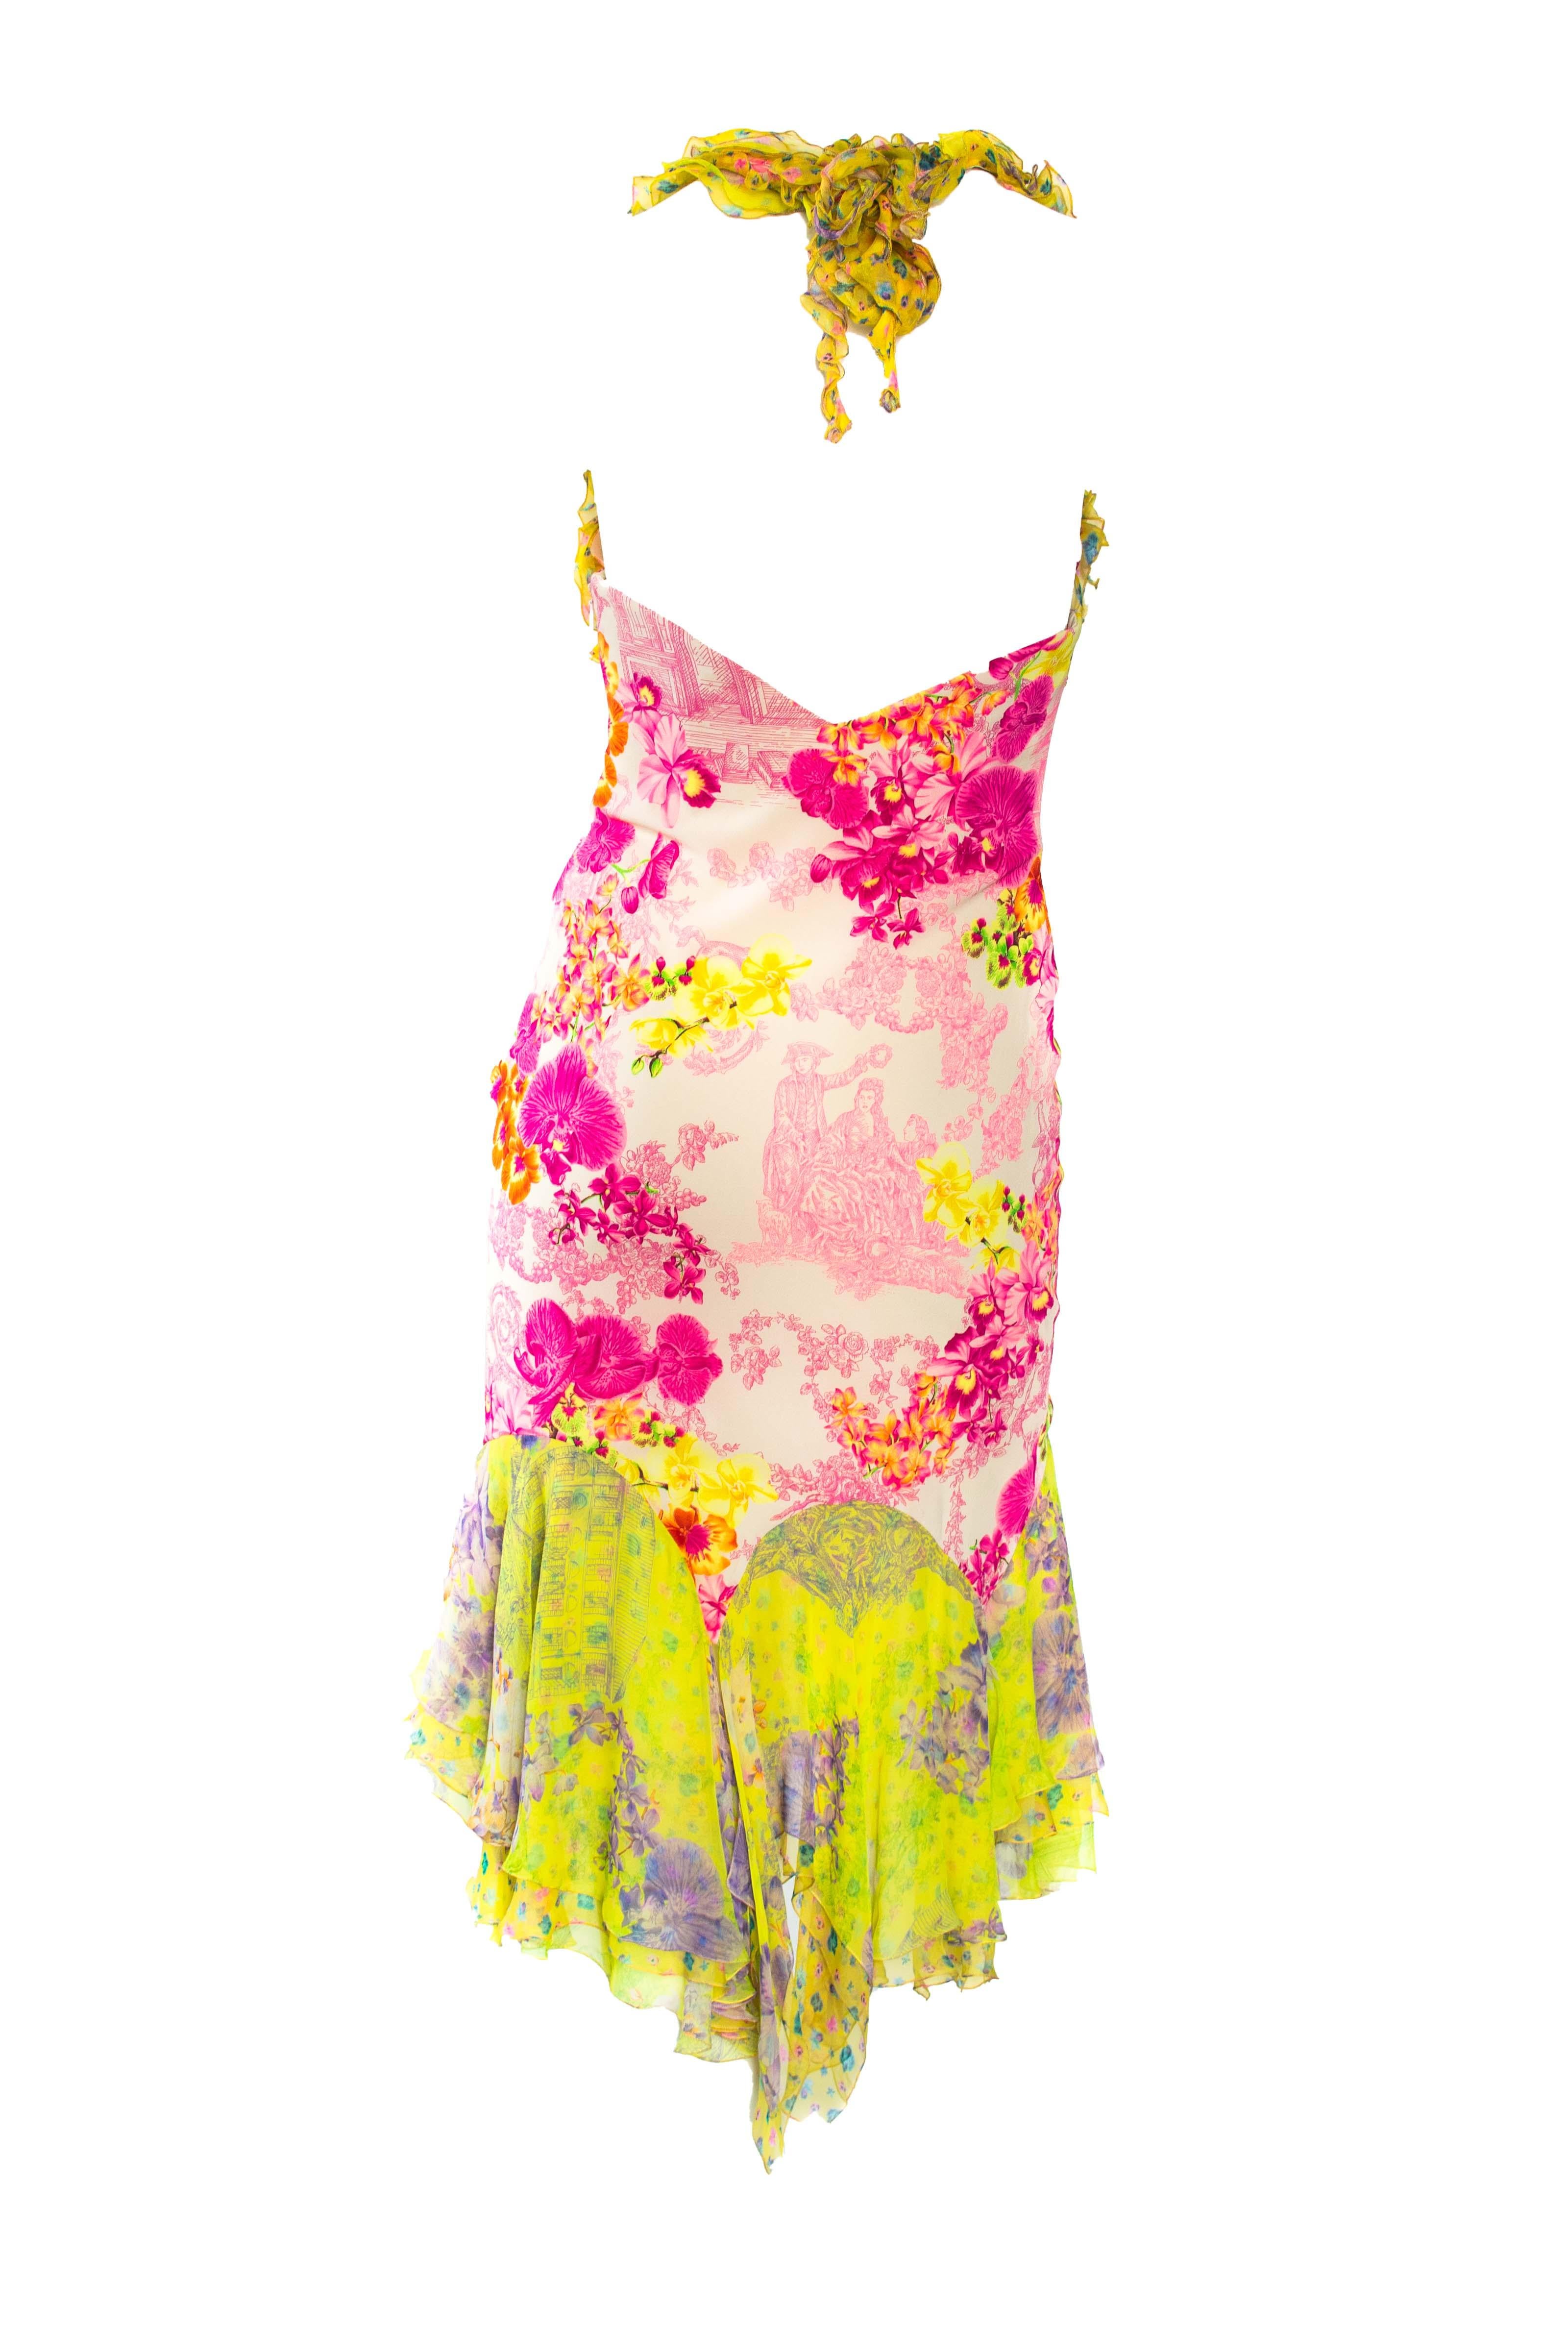 S/S 2004 Versace Neon Floral Chiffon Dress Vintage Runway In Good Condition In West Hollywood, CA